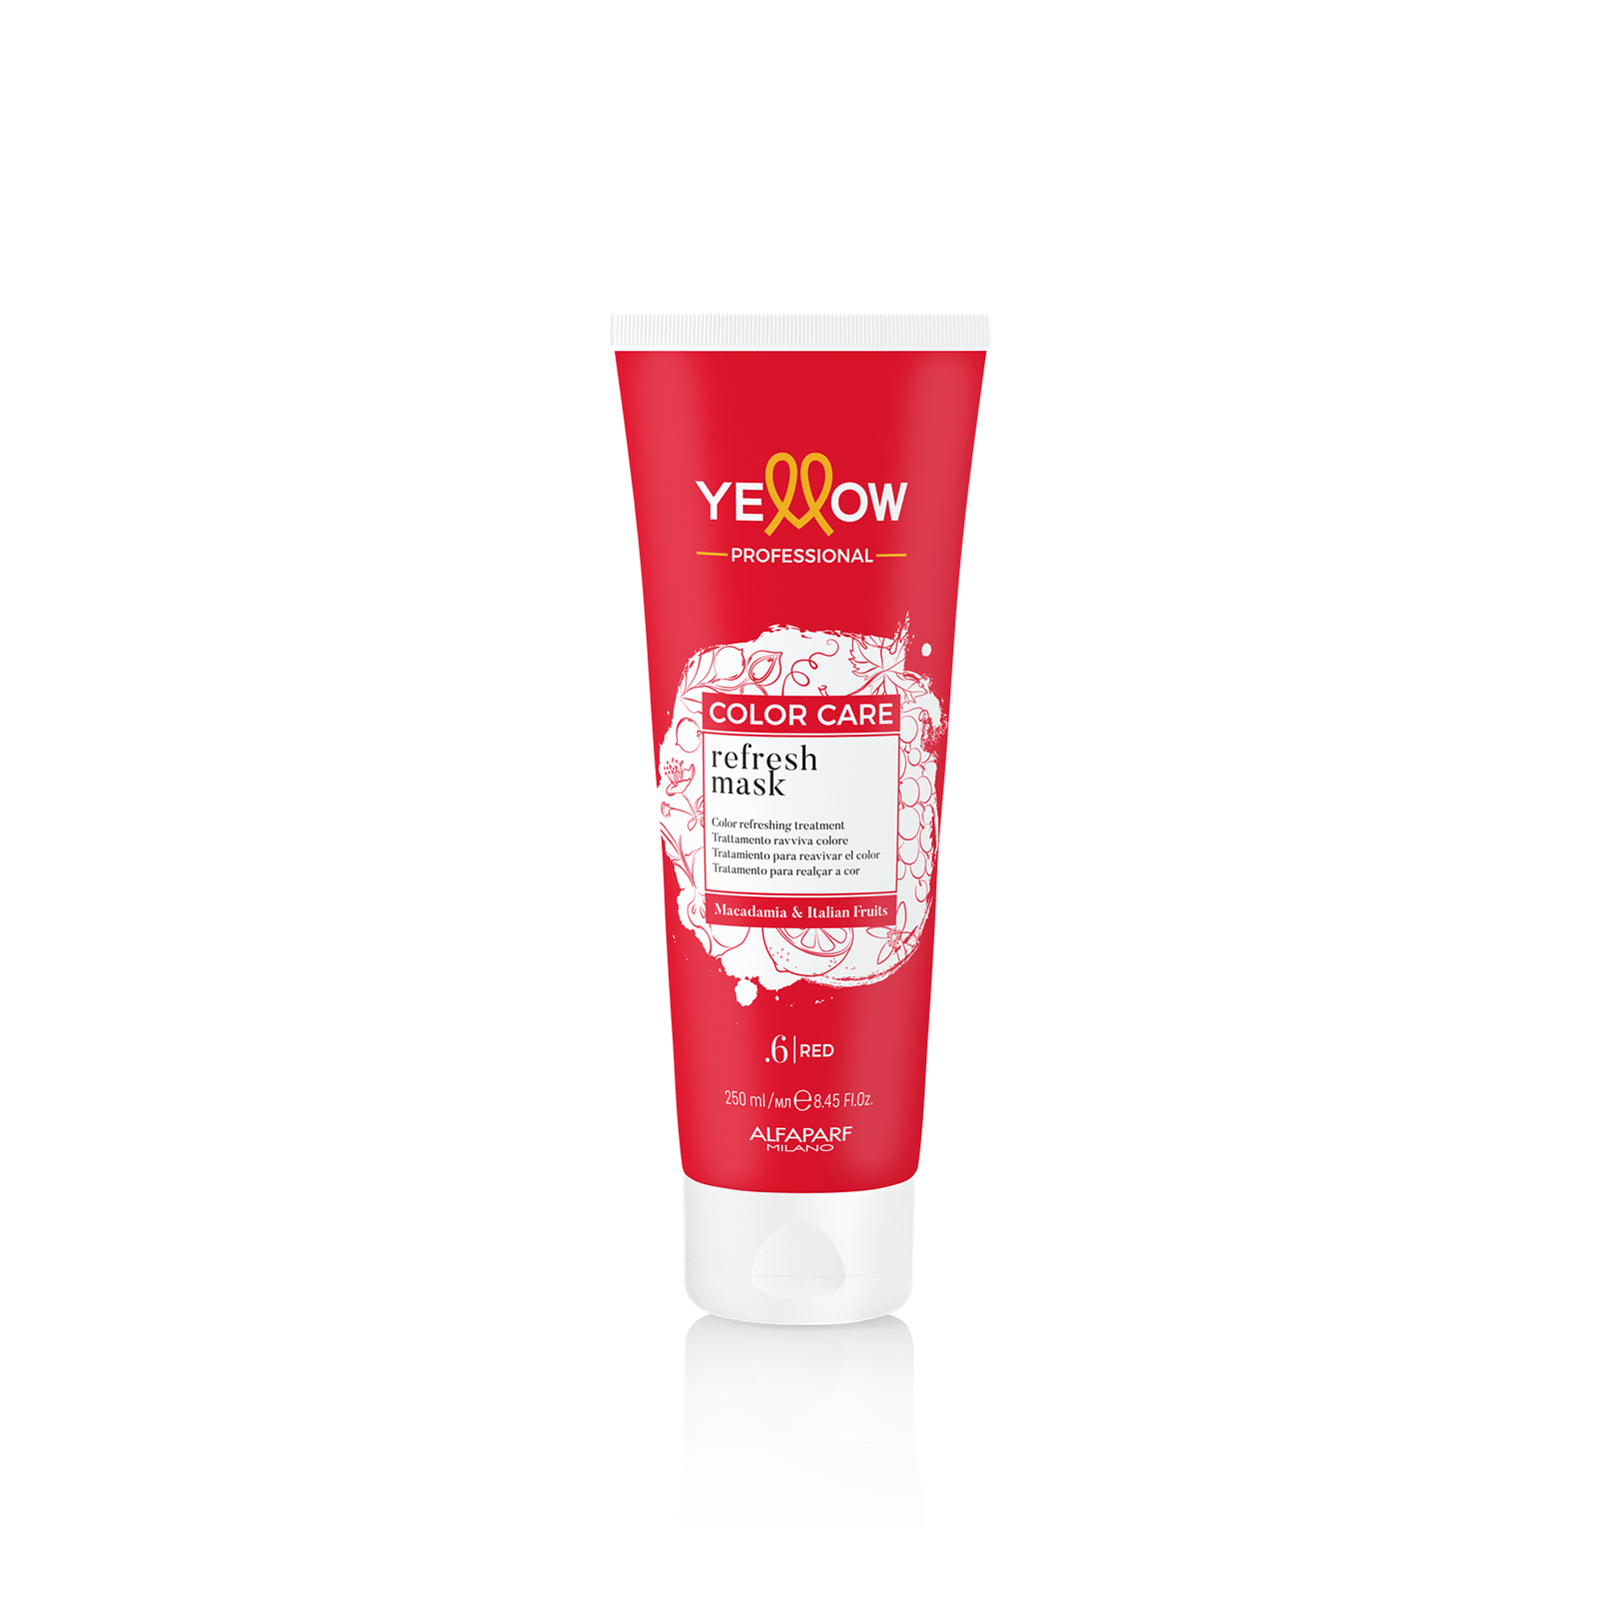 Yellow Professional Color Care Refresh Mask .6 Red 250ml (8.45 fl oz)